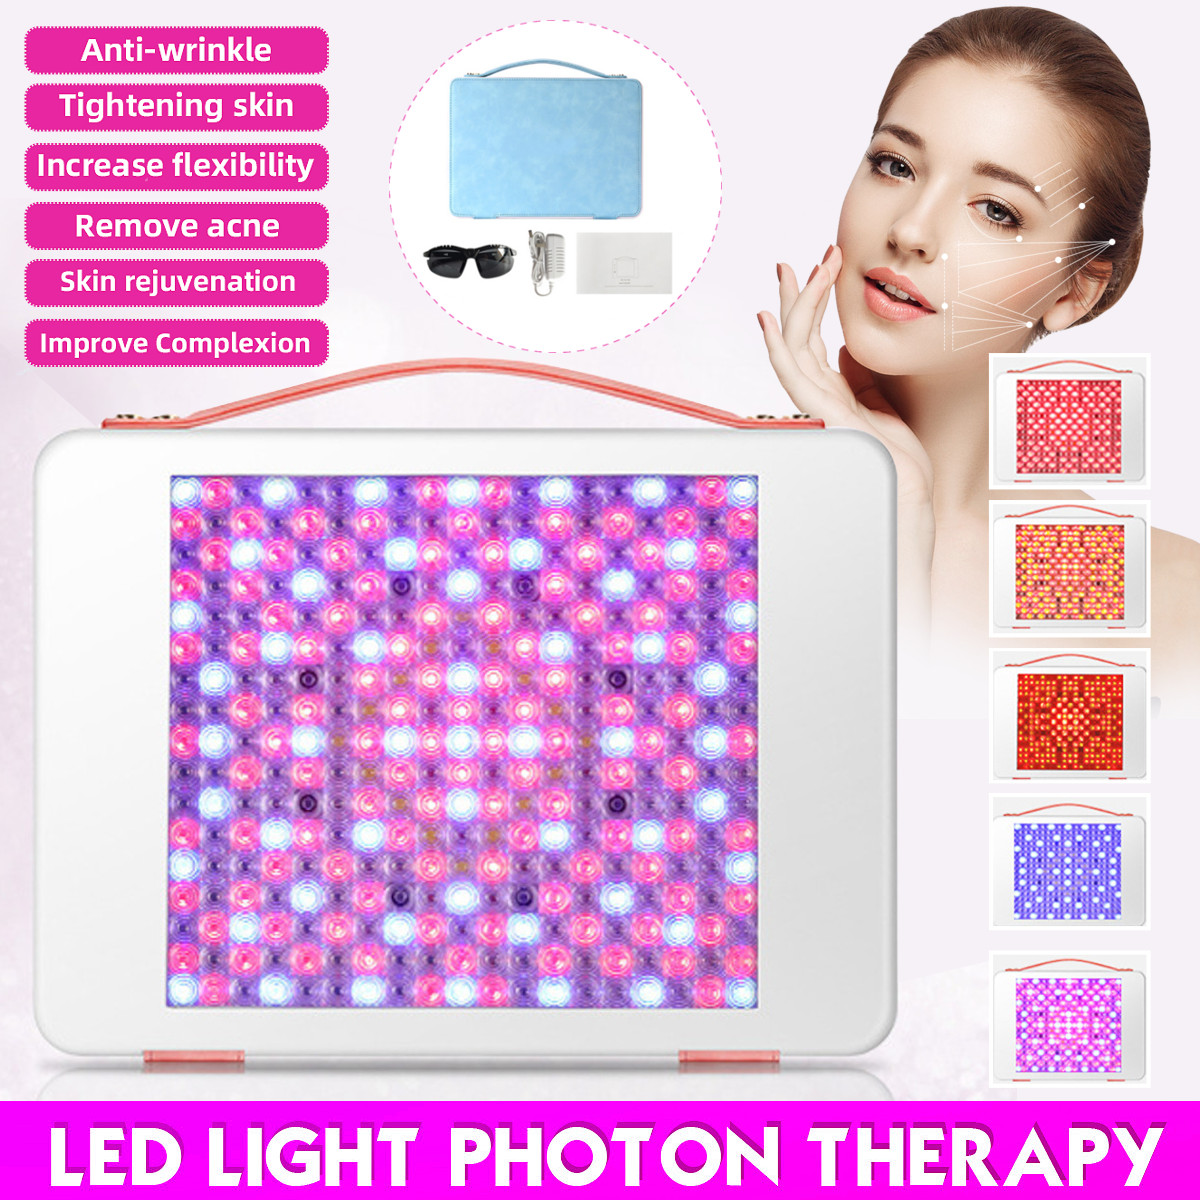 LED-Color-Light-Photon-Therapy-Face-Facial-Beauty-Skin-Therapy-Wrinkle-Machine-1724845-1